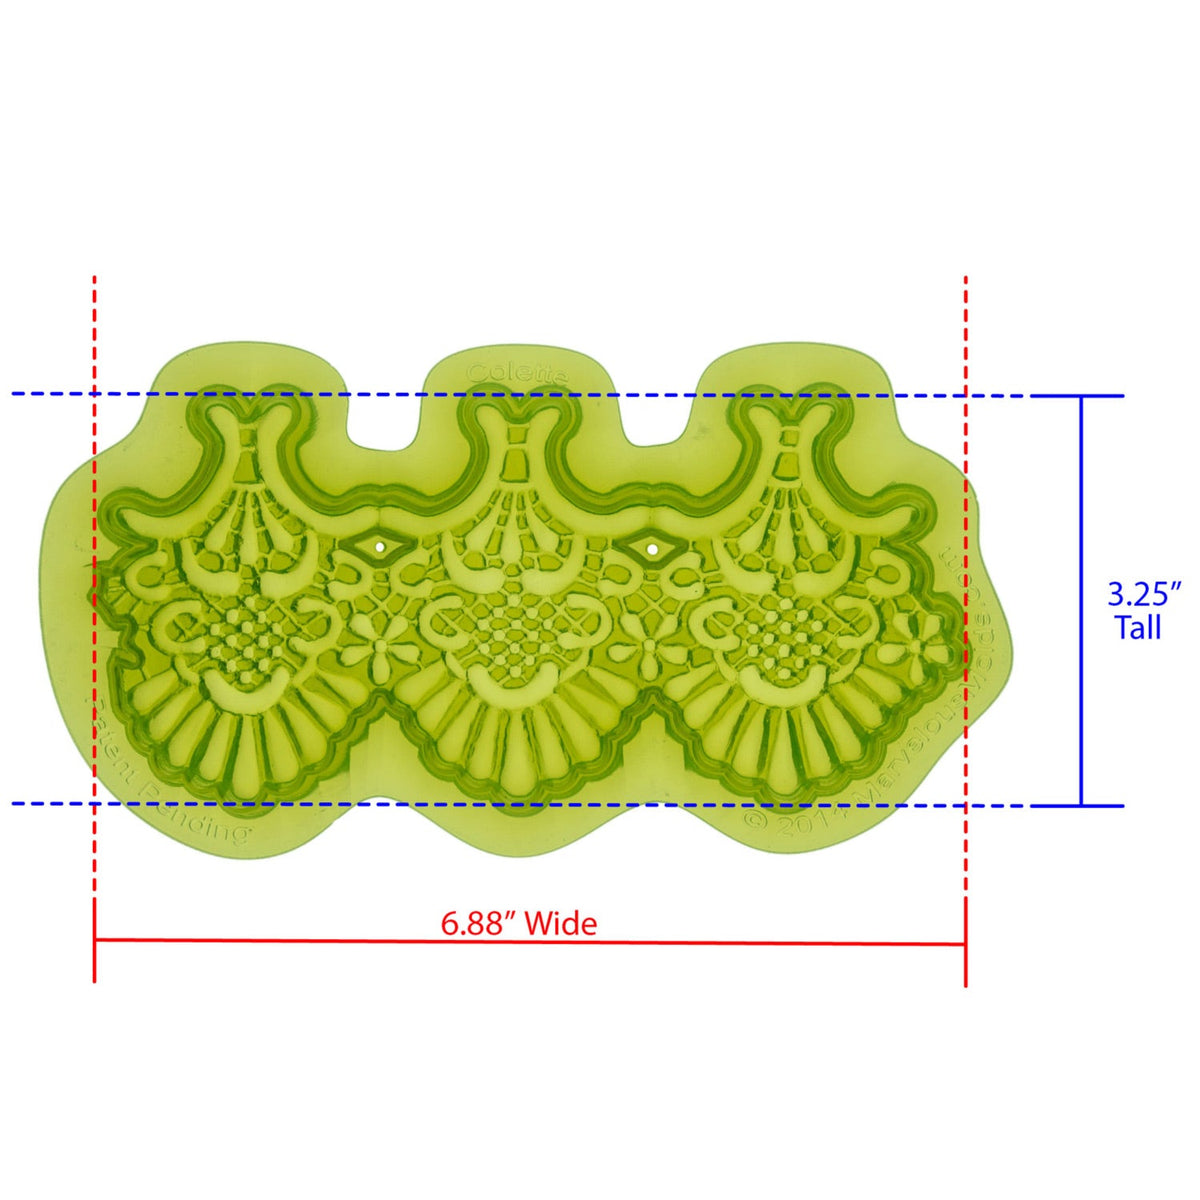 Colette Lace Silicone Mold Cavity measures 6.88 inches Wide by 3.25 inches Tall, proudly Made in USA